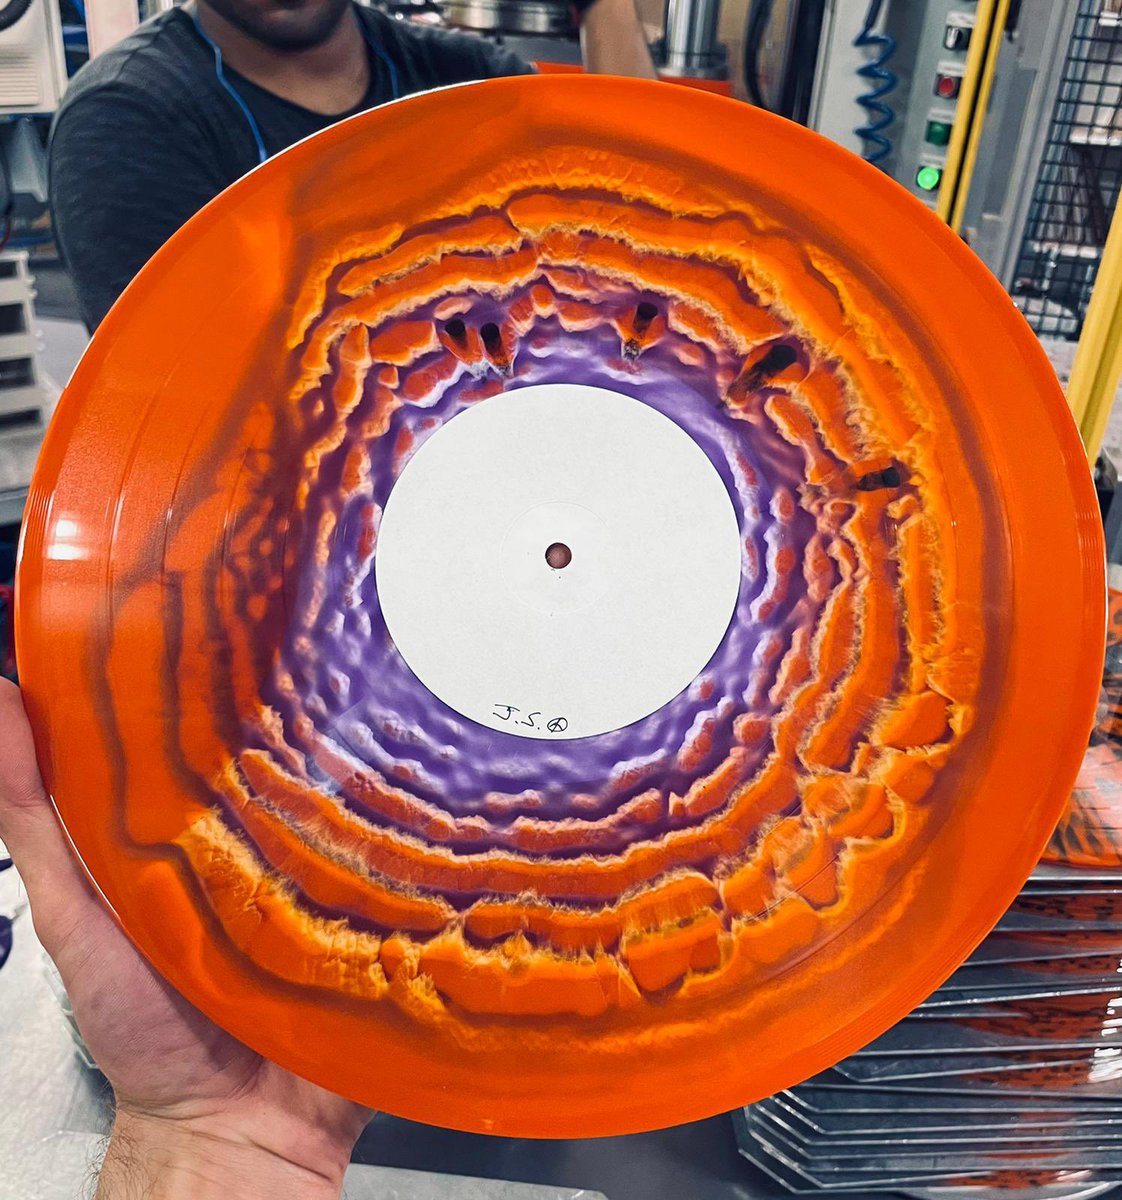 We had to share this stunning vinyl pressing from our friends at @microforumvinyl - follow them for more awesome vinyl, behind-the-scenes and keep up with what their team is working on. #vinyl #vinylrecords #records #vinylart #makingvinyl #toronto #madeatmicroforum #music…